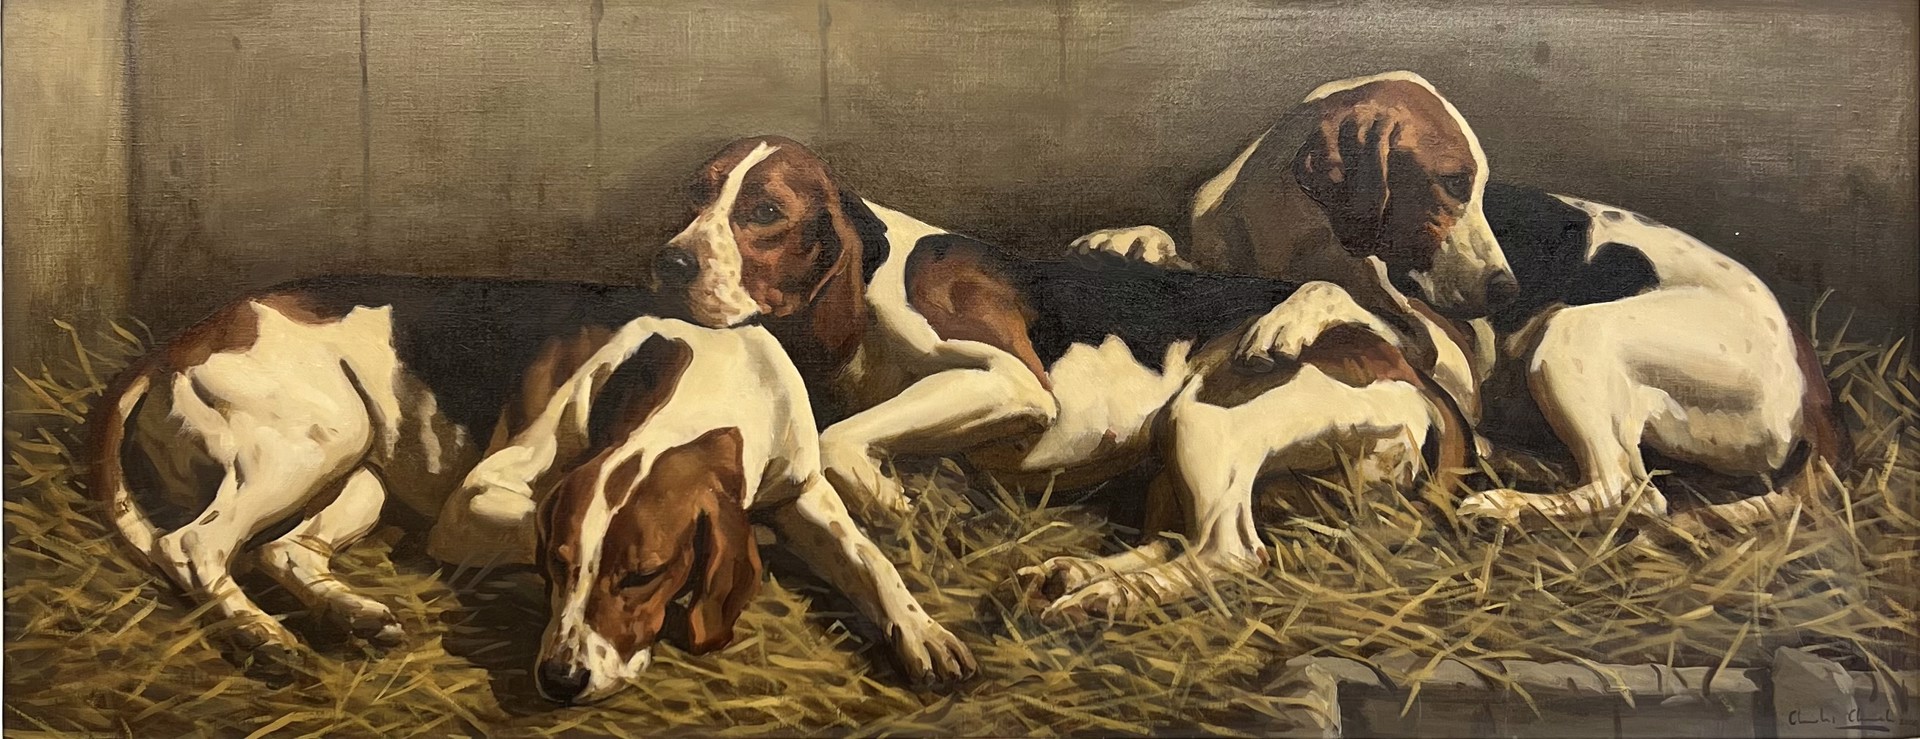 Beagles in a Stall by Charles Church